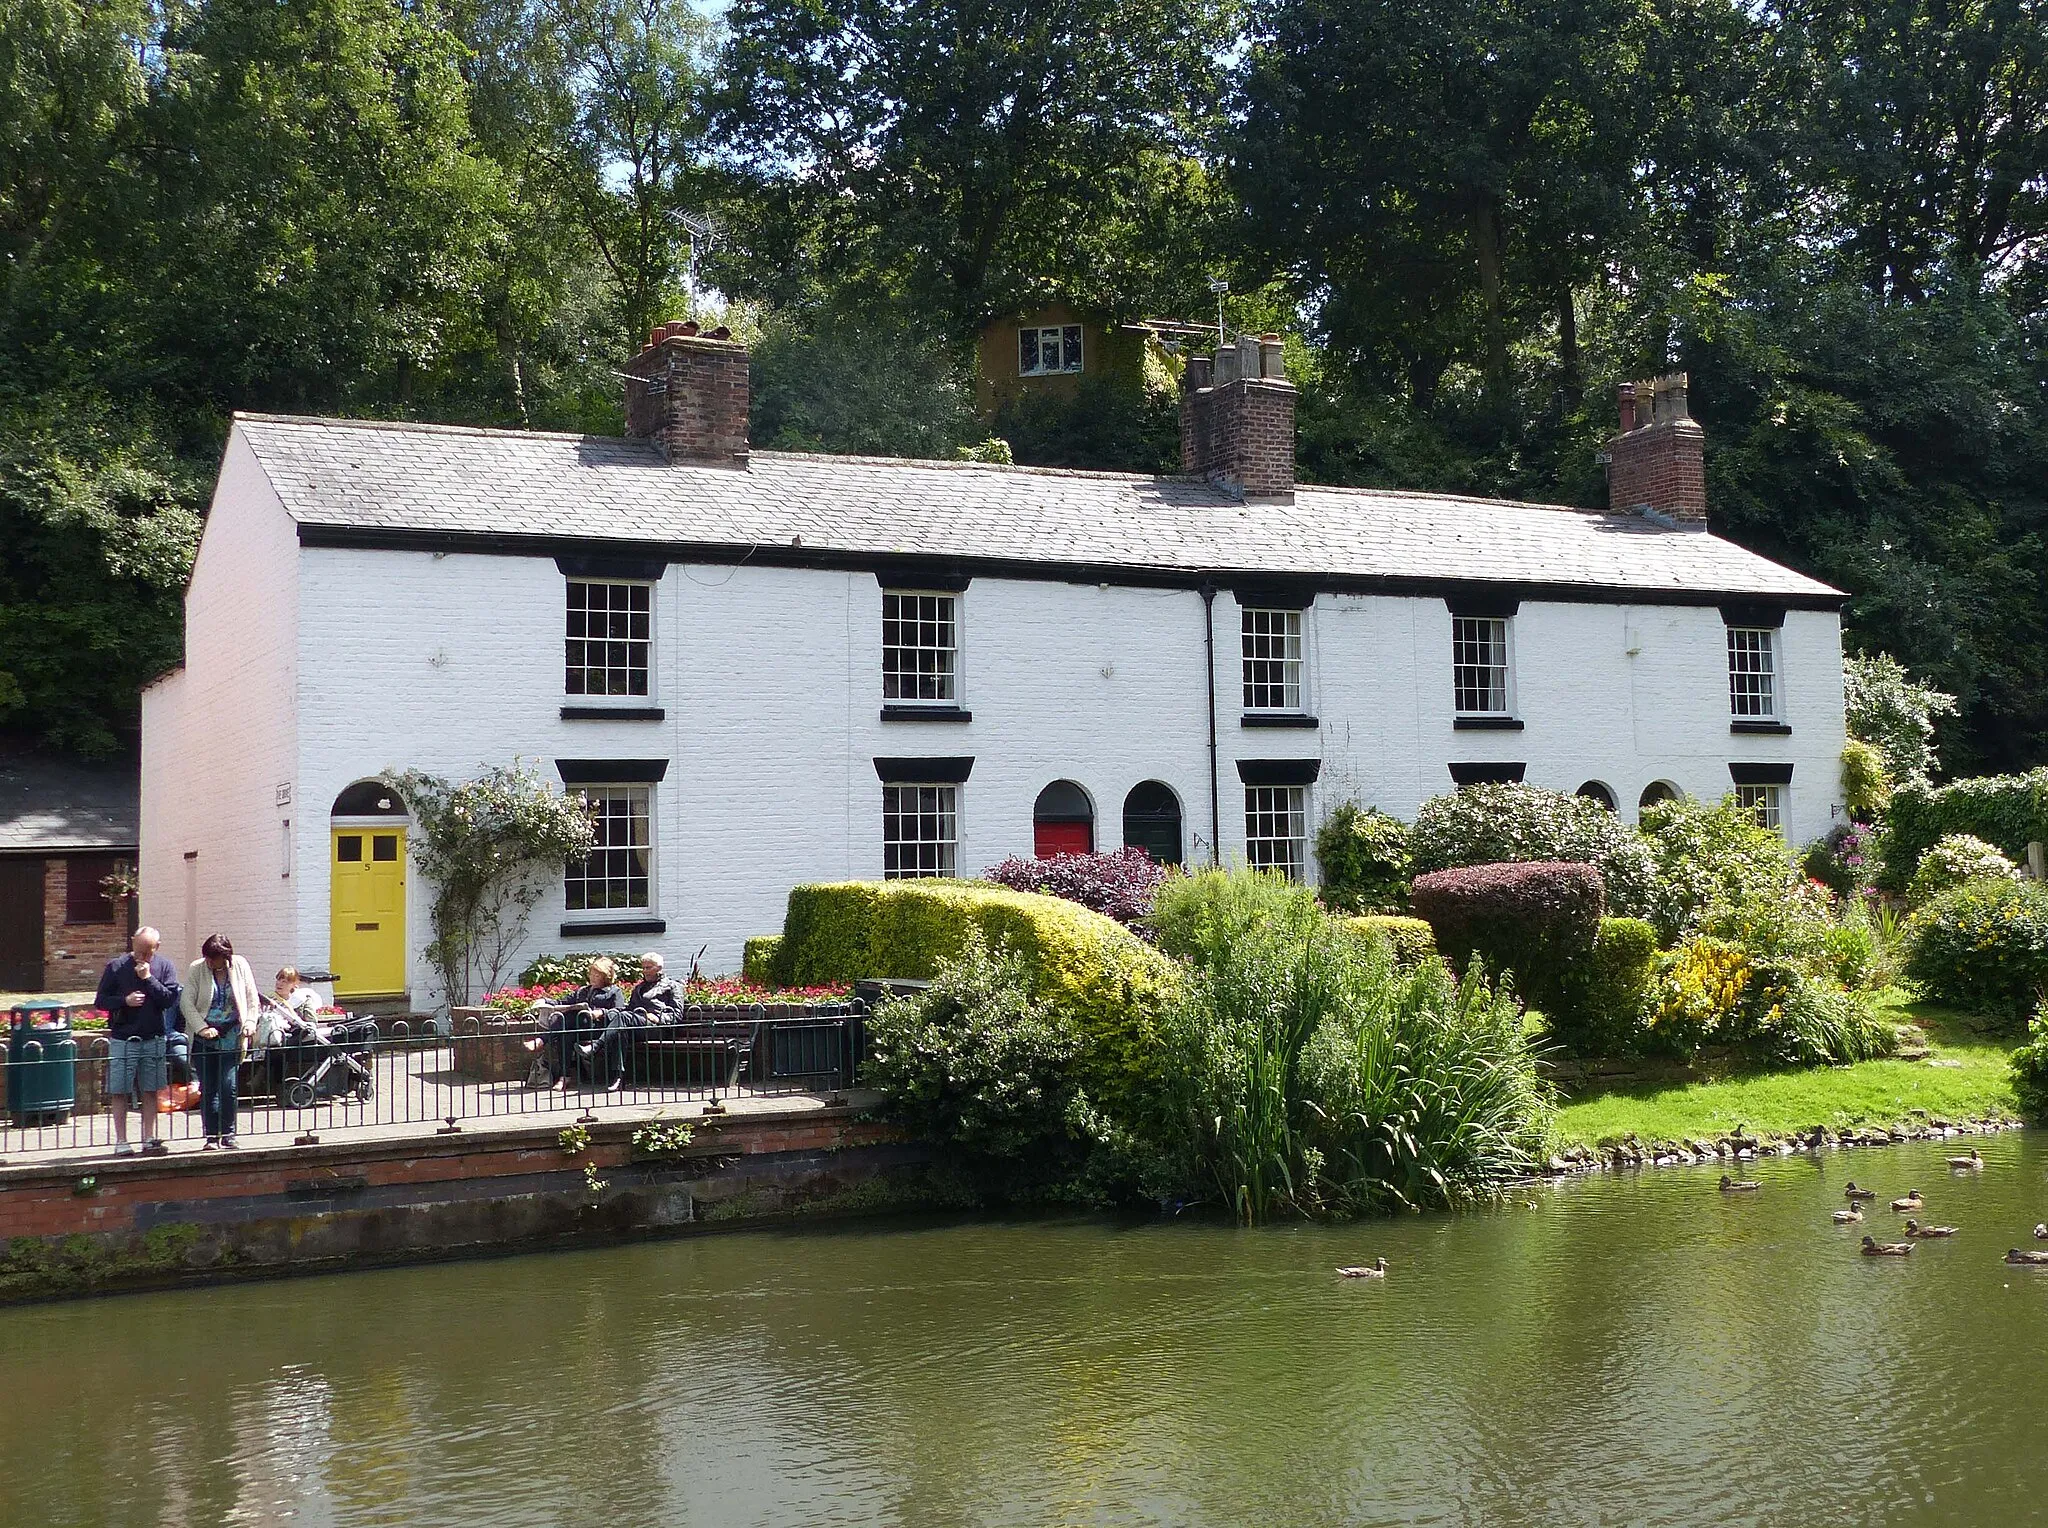 Photo showing: 5, 7, 9, 11 and 13, The Grove: Grade II listed terrace of cottages in Lymm, Cheshire